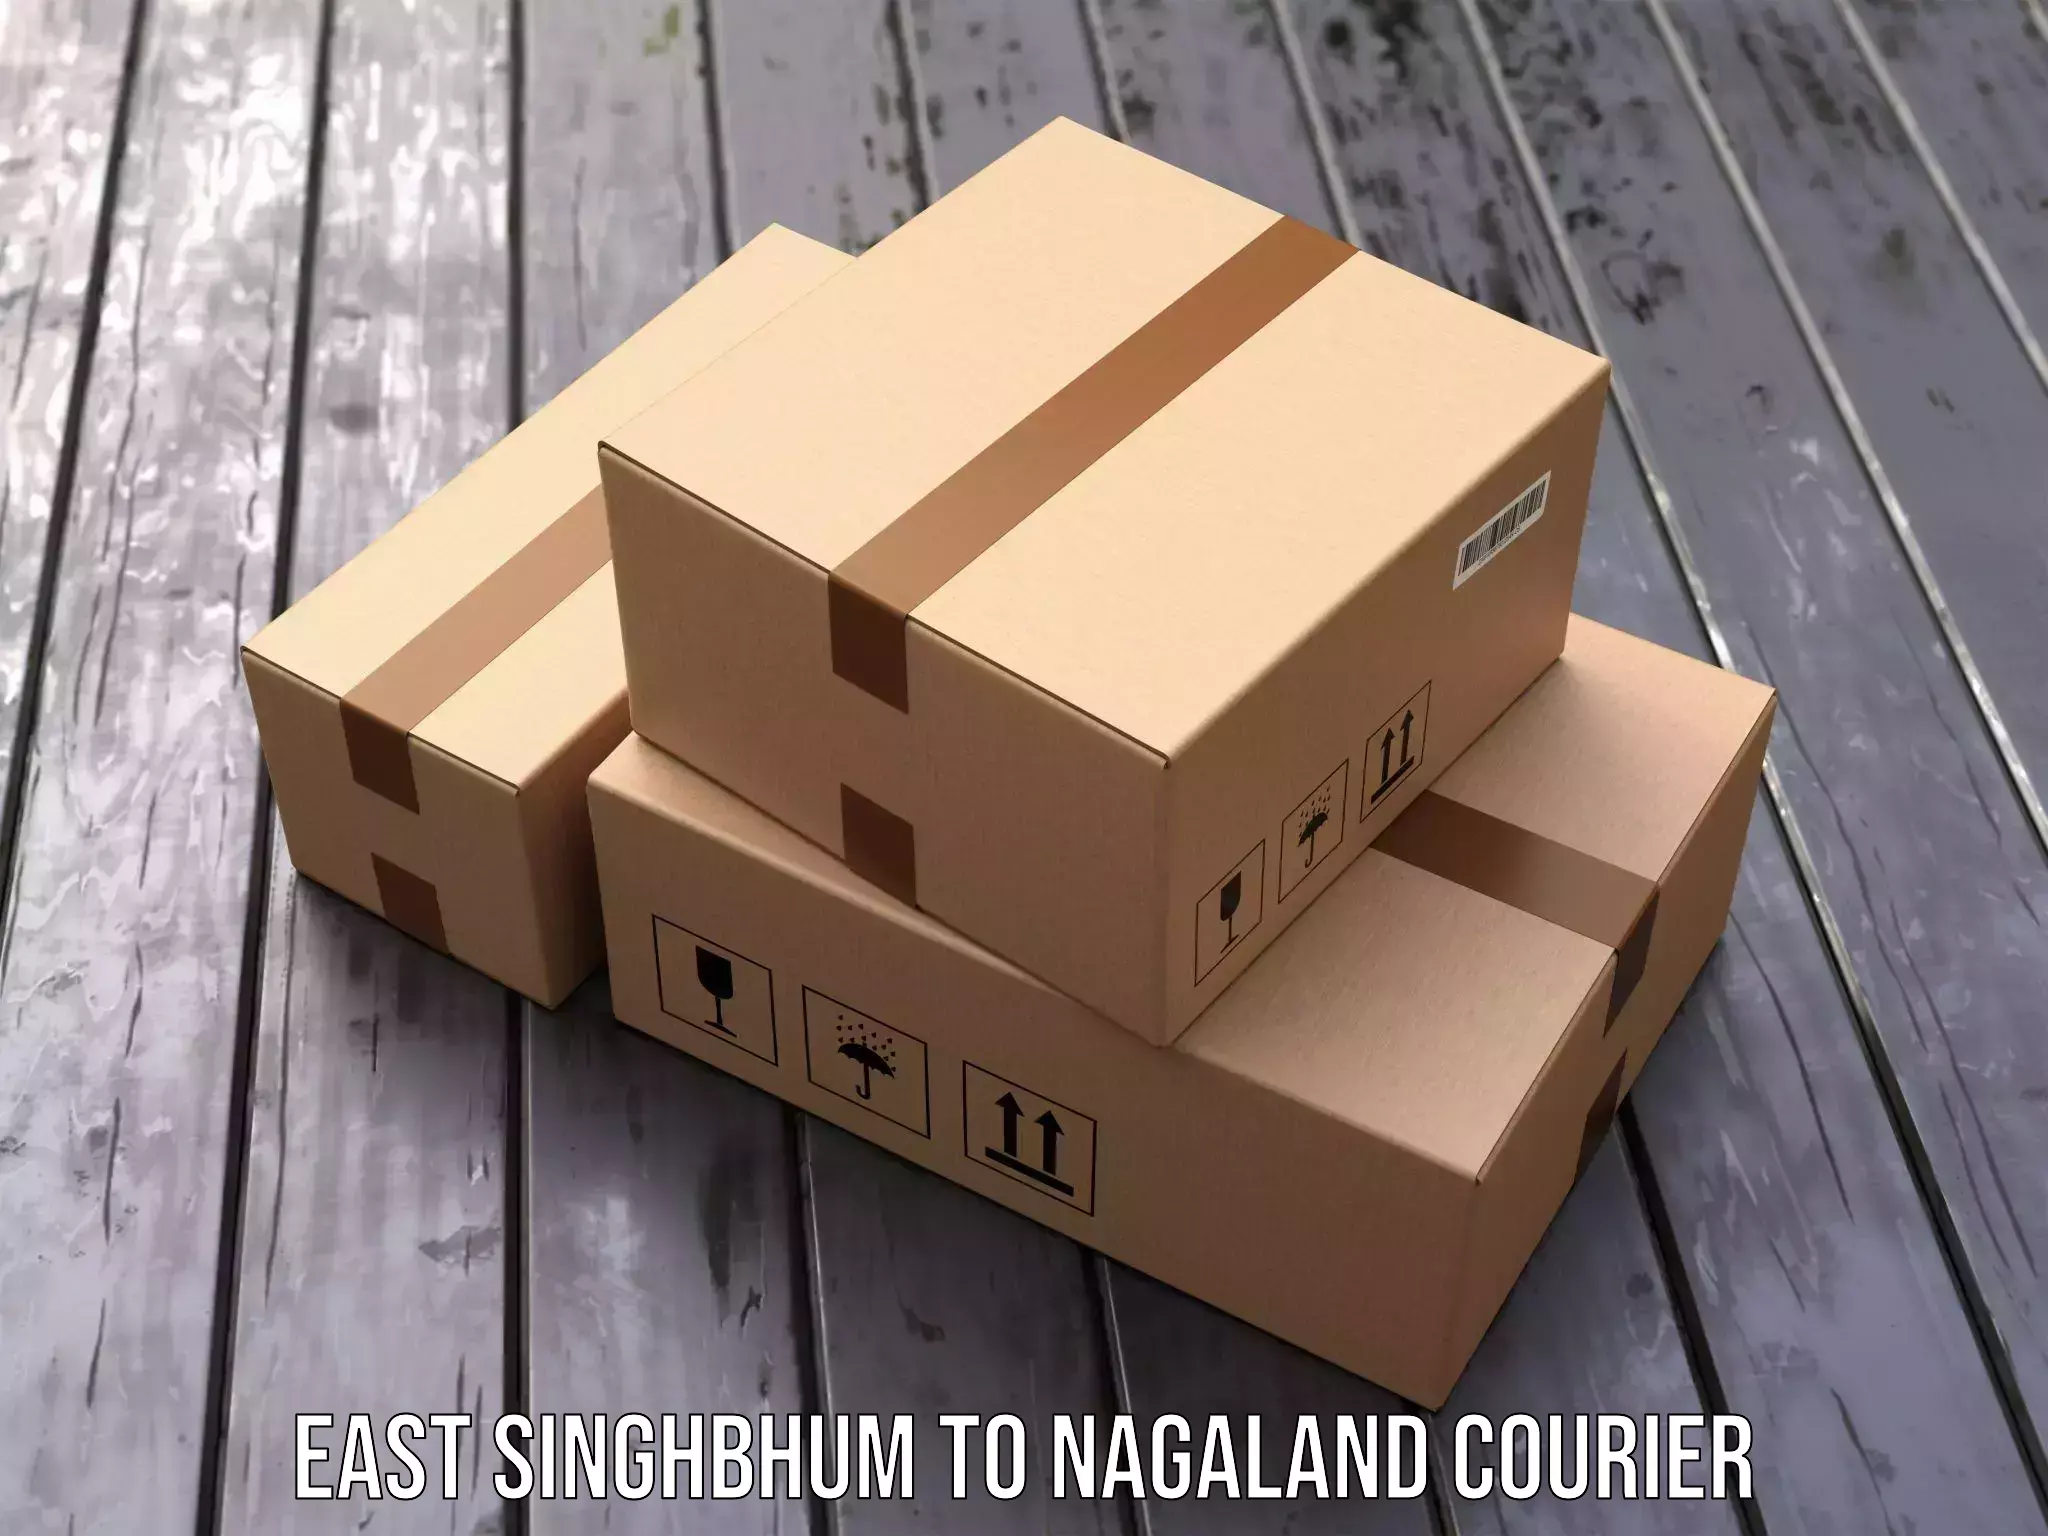 Courier service efficiency East Singhbhum to Nagaland